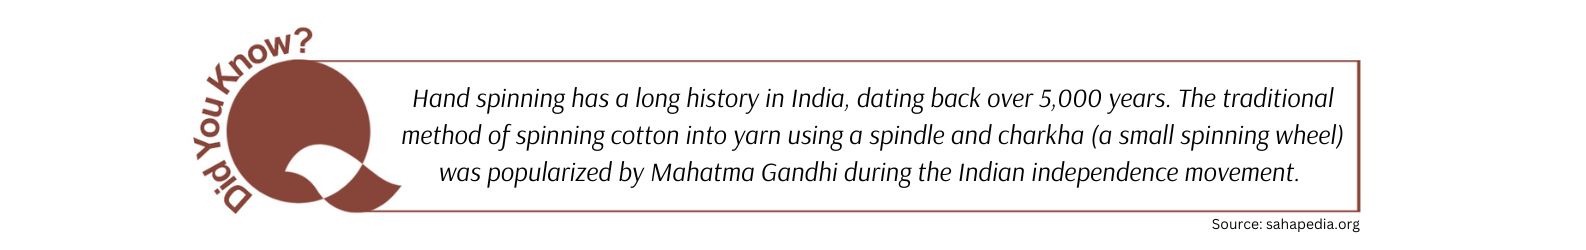 Hand spinning has a long history in India, dating back over 5,000 years! The traditional method of spinning cotton into yarn using a spindle and charkha (a small spinning wheel) was popularized by Mahatma Gandhi during the Indian independence movement.